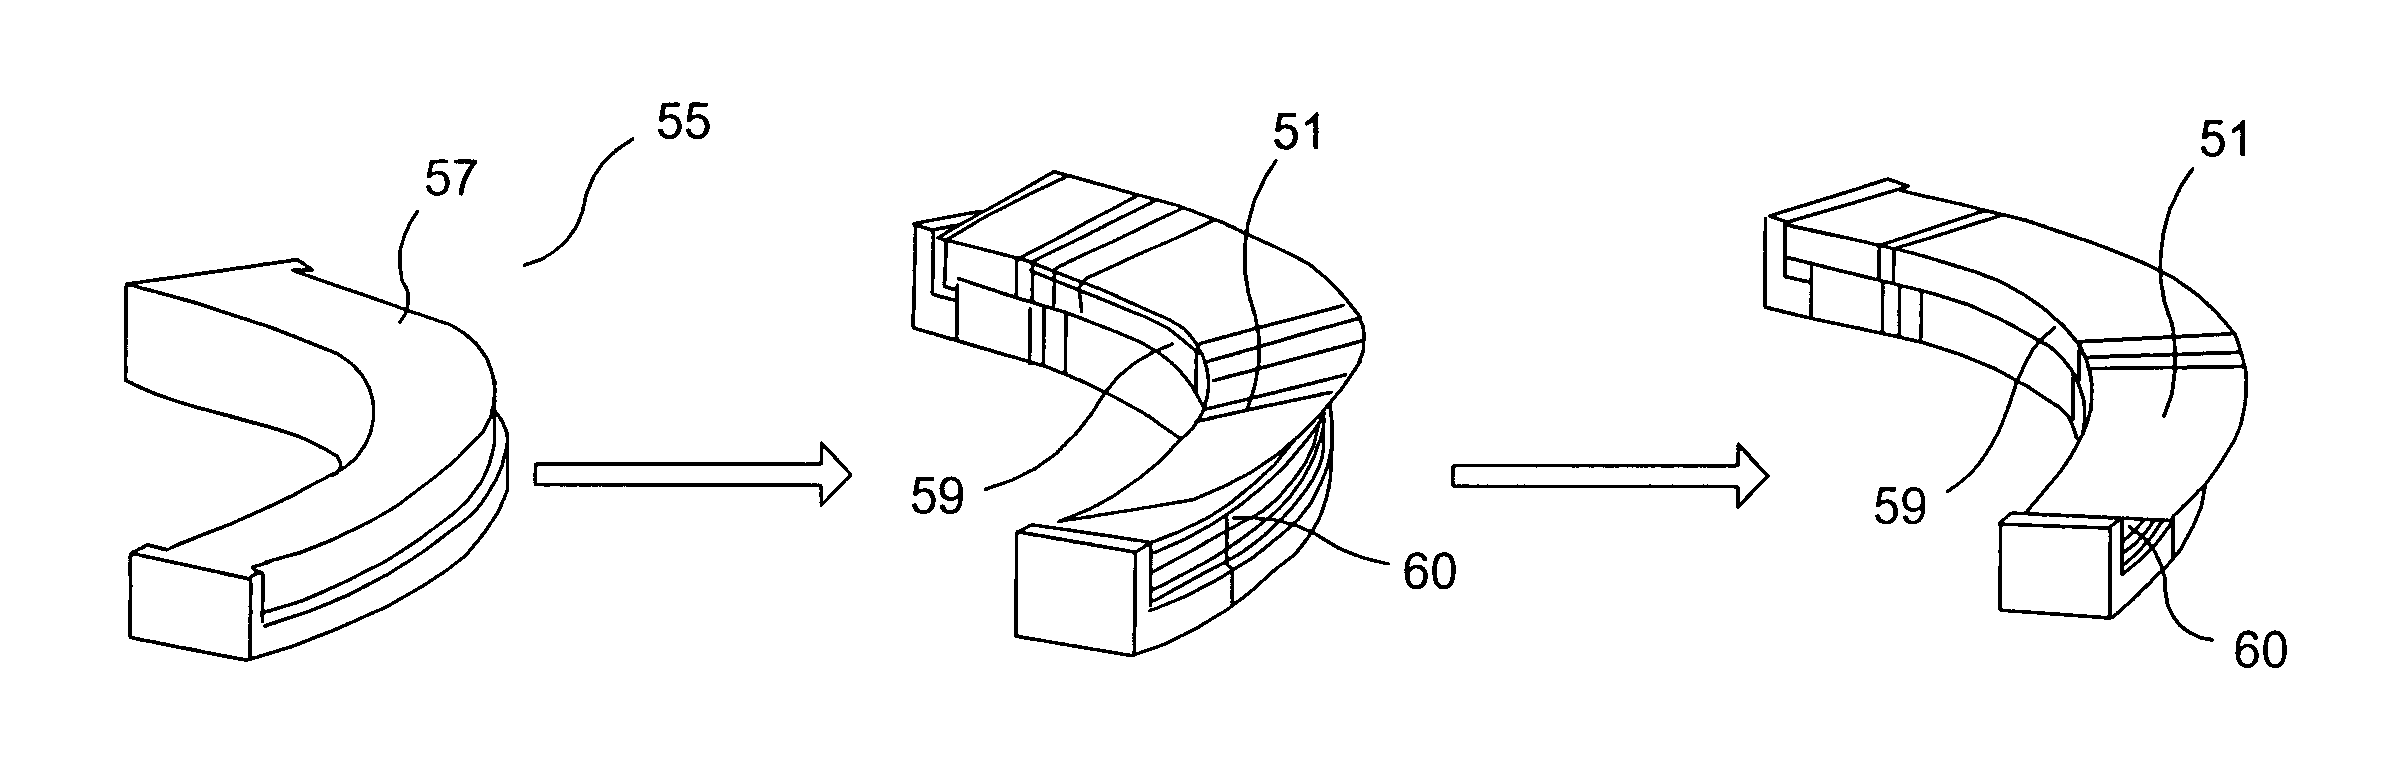 Process and tools for manufacturing composite ring frames